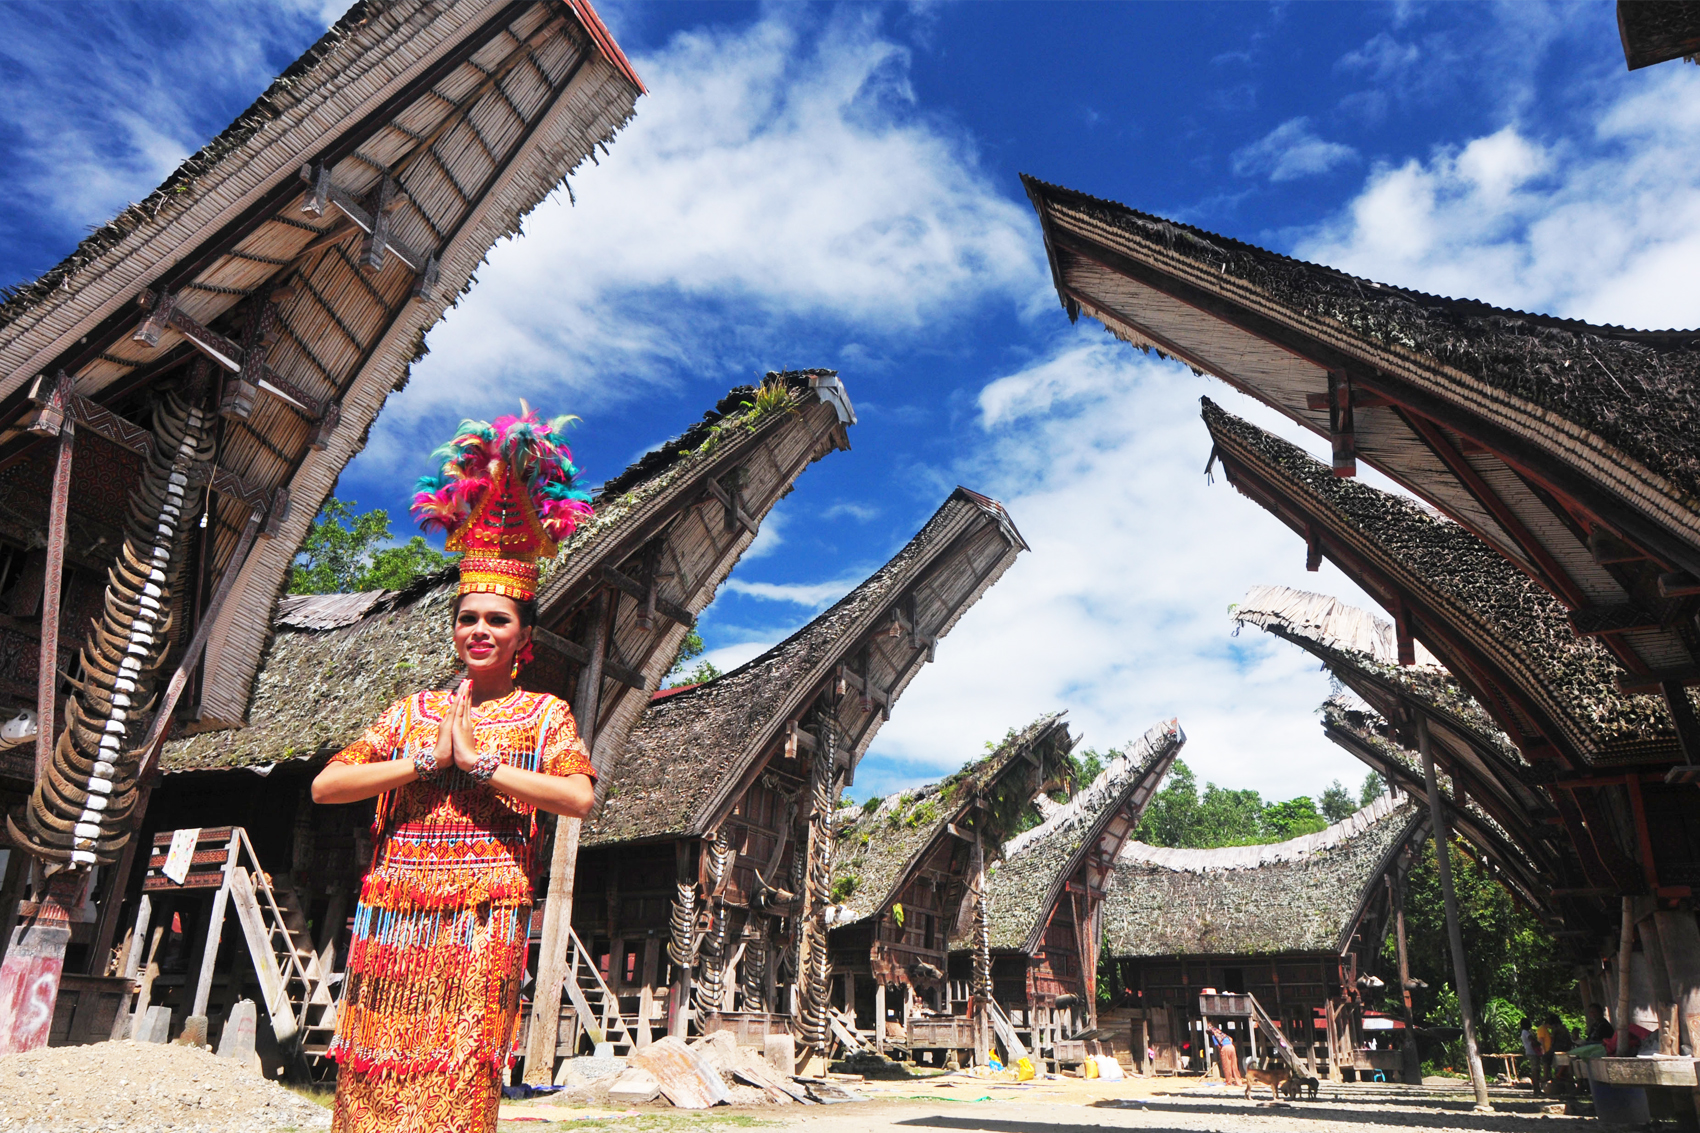 The Sacred Highlands
Tana Toraja, South Sulawesi - Gloria Tours and Travel | The Best and Cheap Travel Agency in Toraja, South Sulawesi, North Sulawesi, and Central Sulawesi